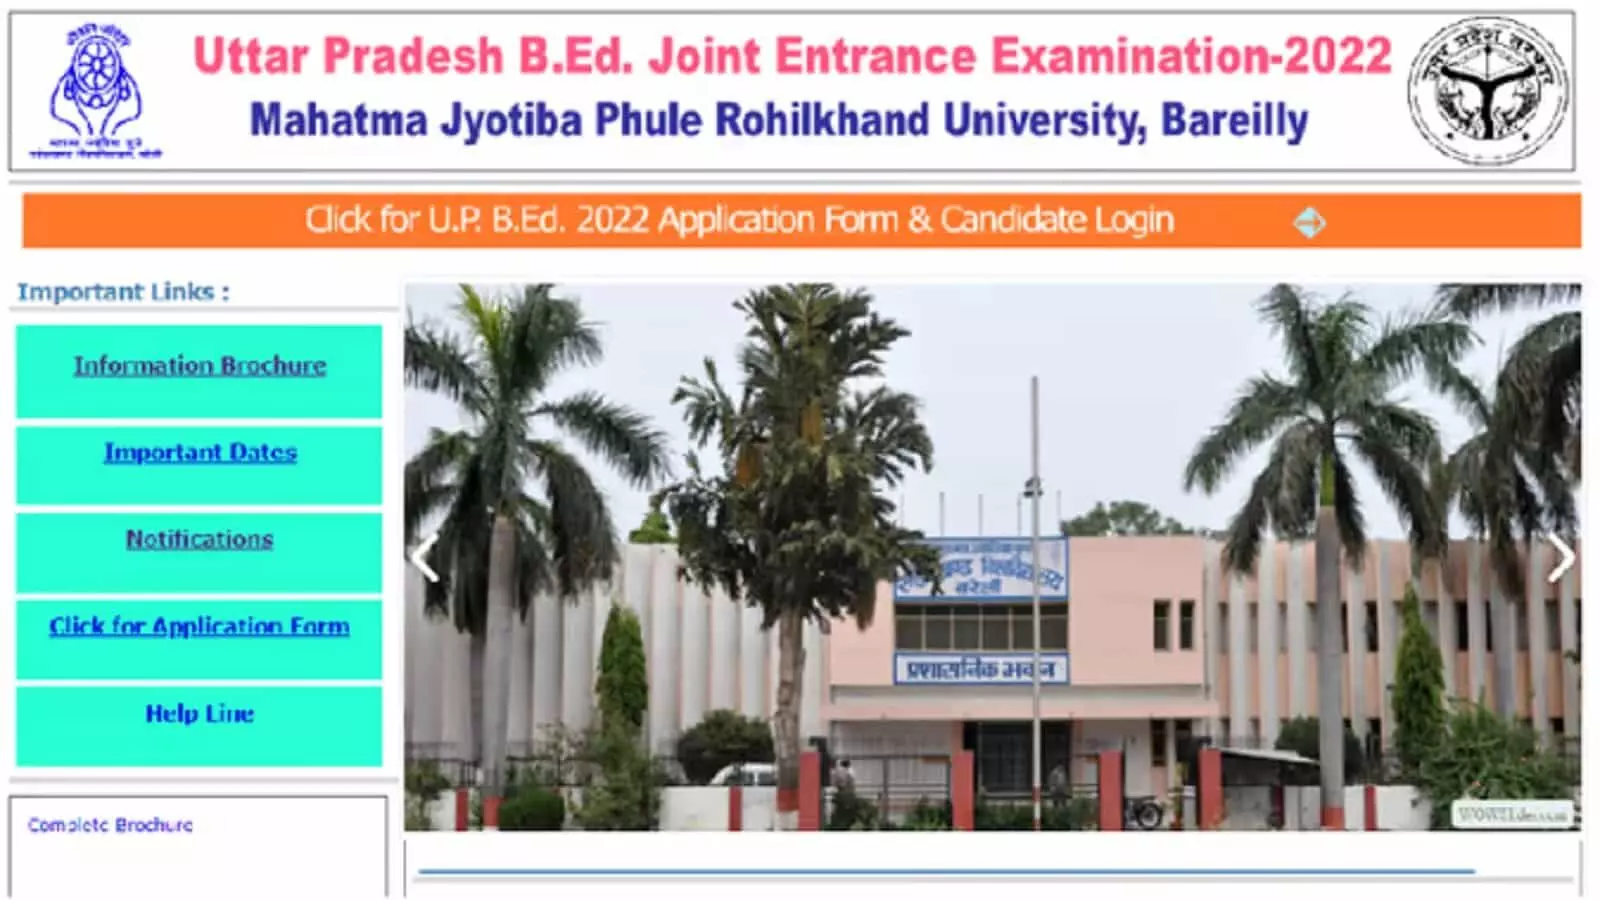 UP BEd JEE 2022 admit card